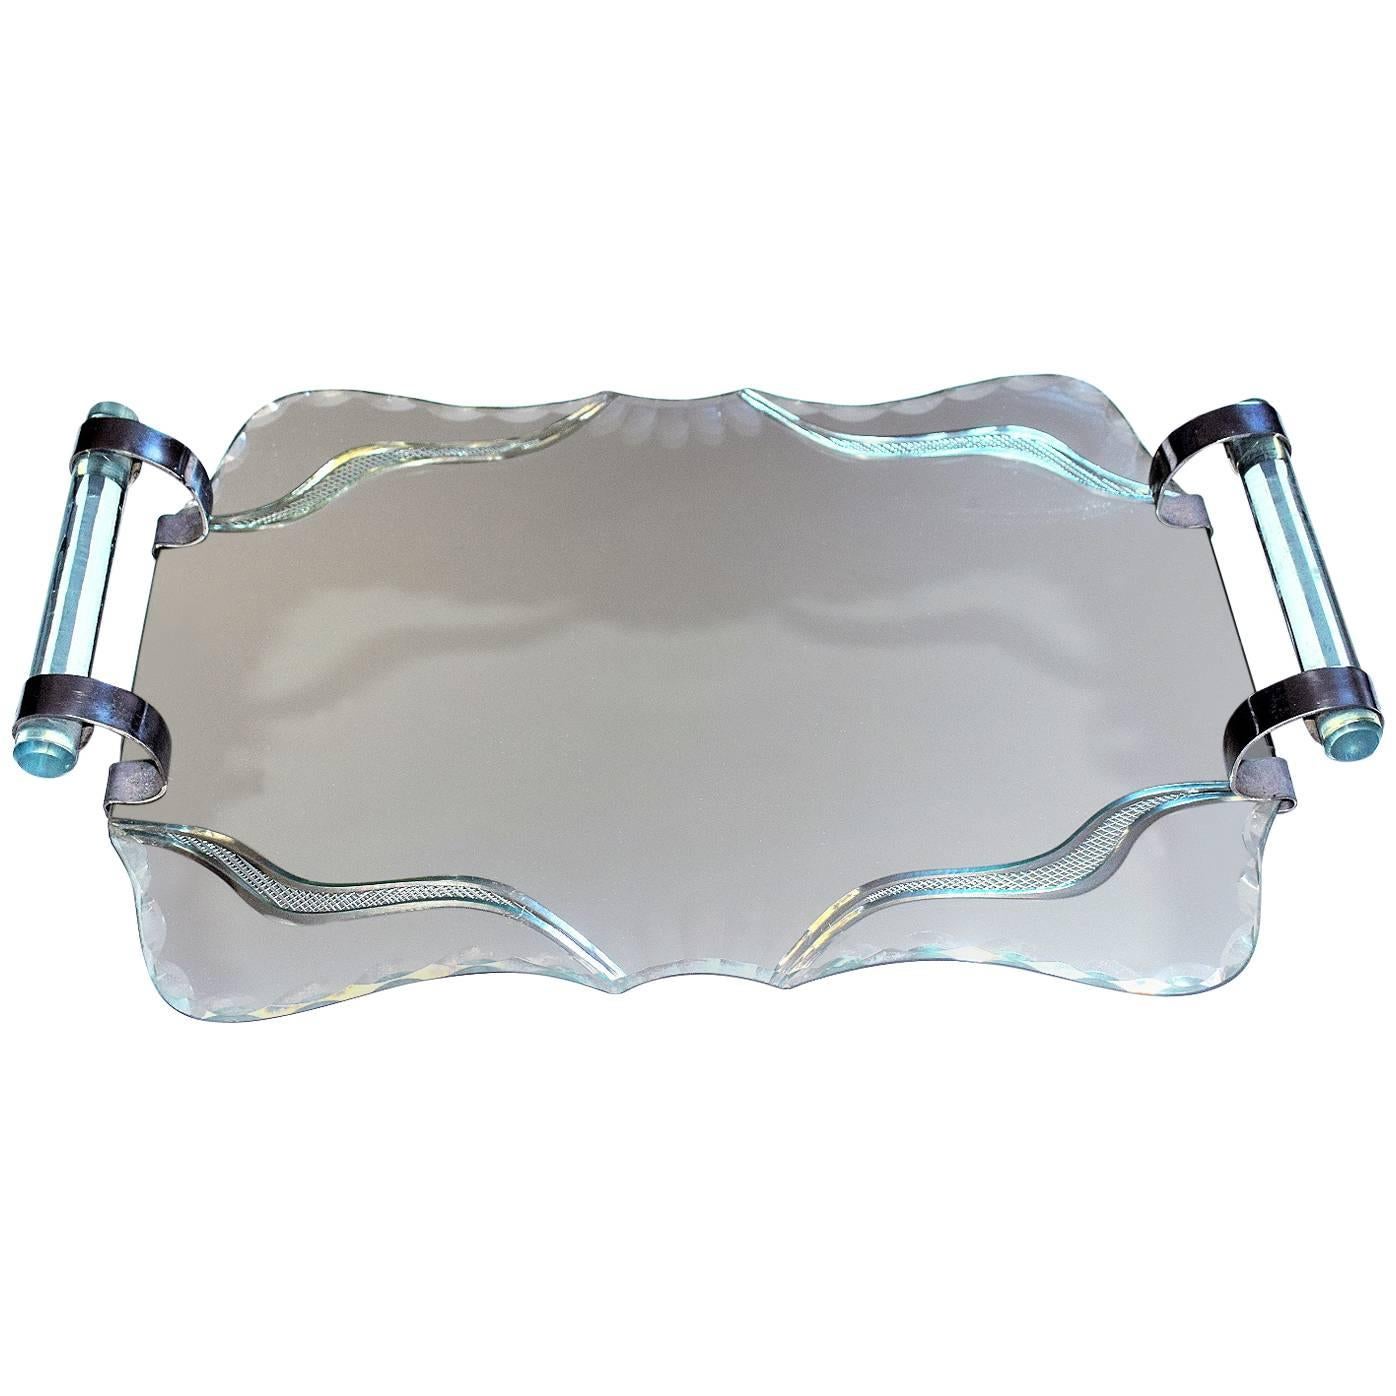 Art Deco, 1930s French Mirror and Chrome Drinks Tray For Sale